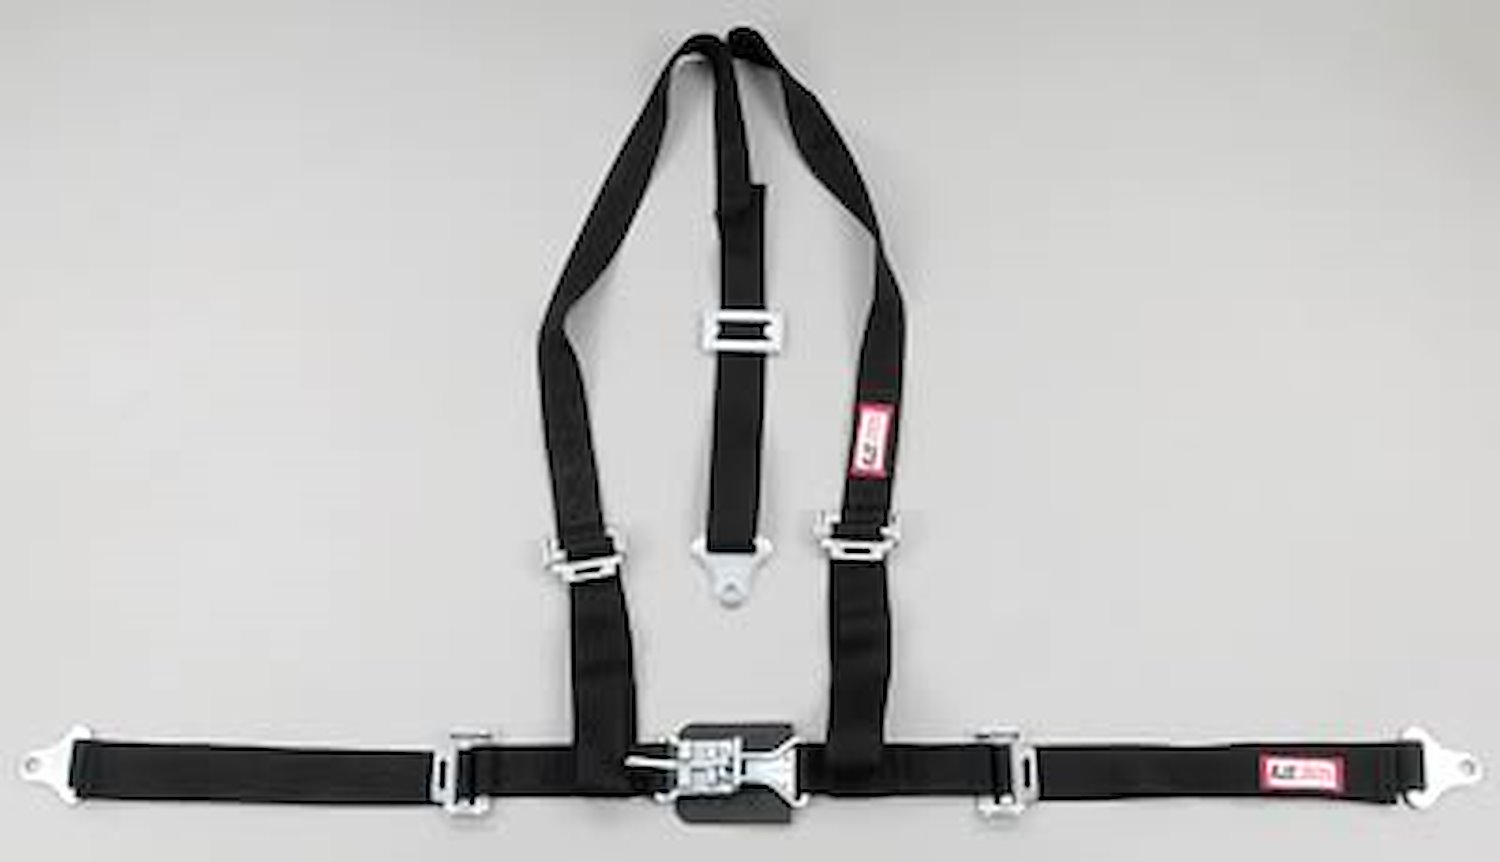 NON-SFI L&L HARNESS 3 PULL DOWN Lap BELT SEWN IN 2 S.H. Y FLOOR Mount w/STERNUM STRAP ALL WRAP ENDS BLACK